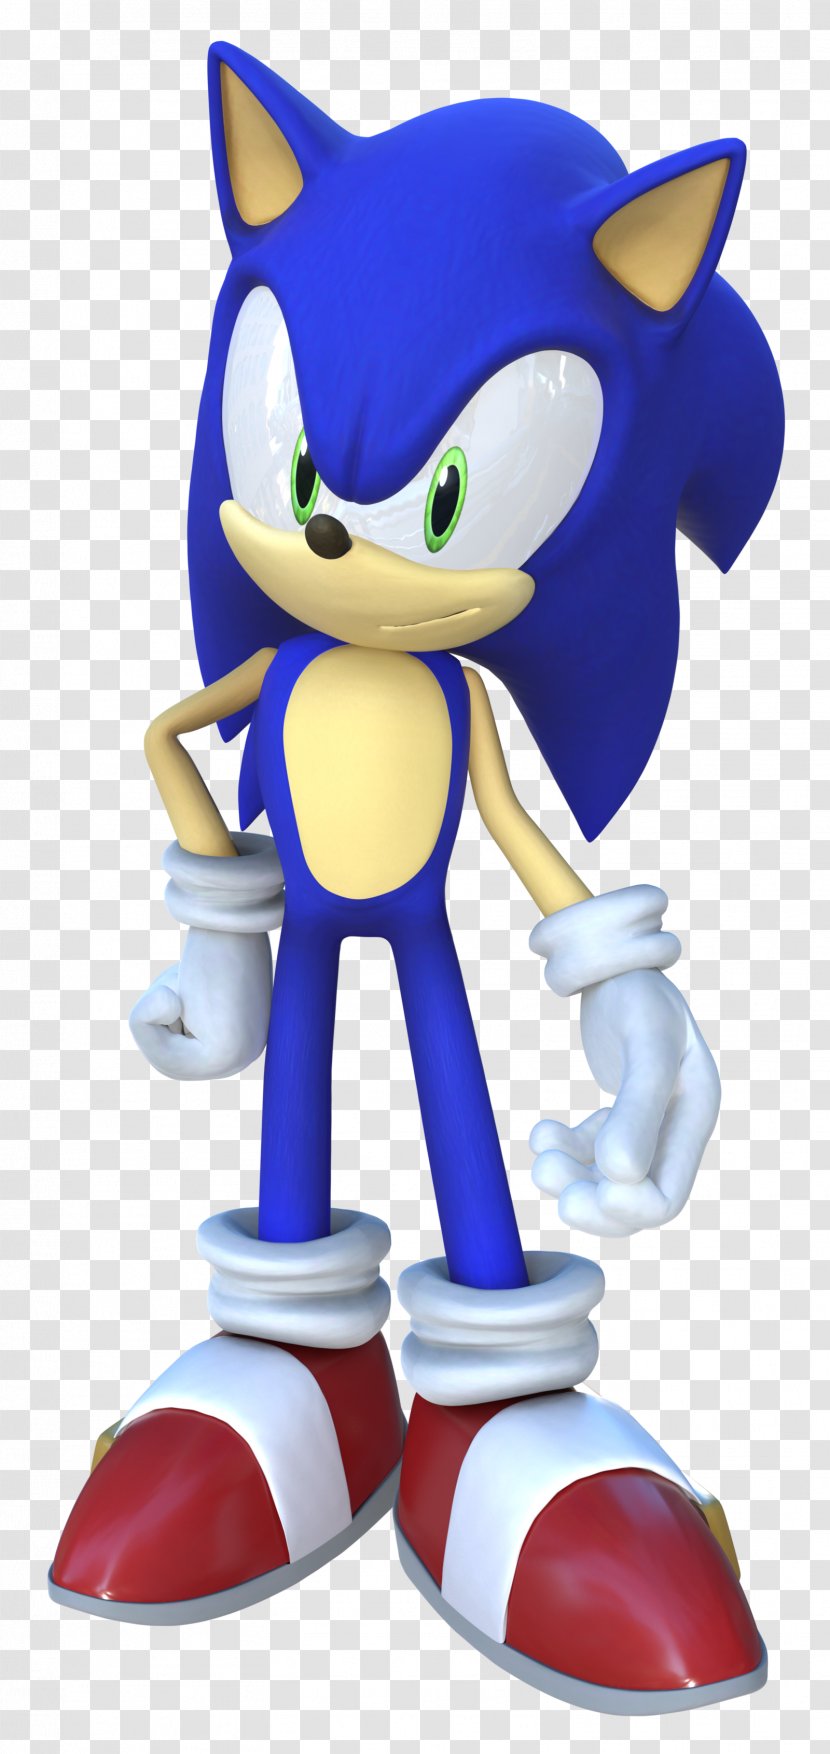 Sonic Unleashed The Hedgehog 4: Episode I Adventure 2 And Black Knight - Blue Transparent PNG